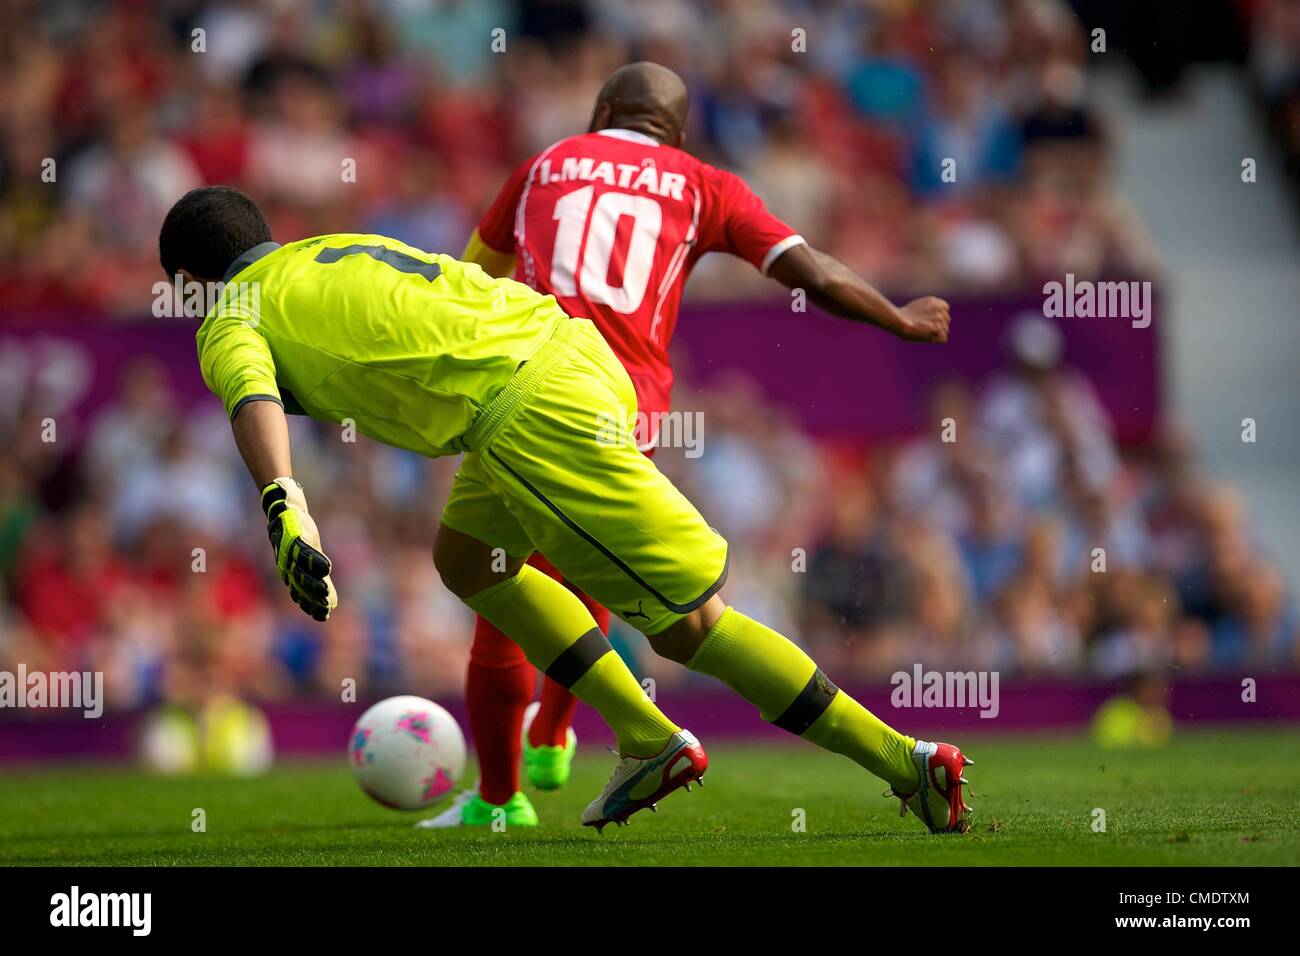 26.07.2012 Manchester, England. Uruguay goalkeeper Martín Campaña is beaten by a controlled move from United Arab Emirates forward Ismail Matar as he scores the opeing goal during the first round group A mens match between United Arab Emirates and Uruguay at Old Trafford. Stock Photo